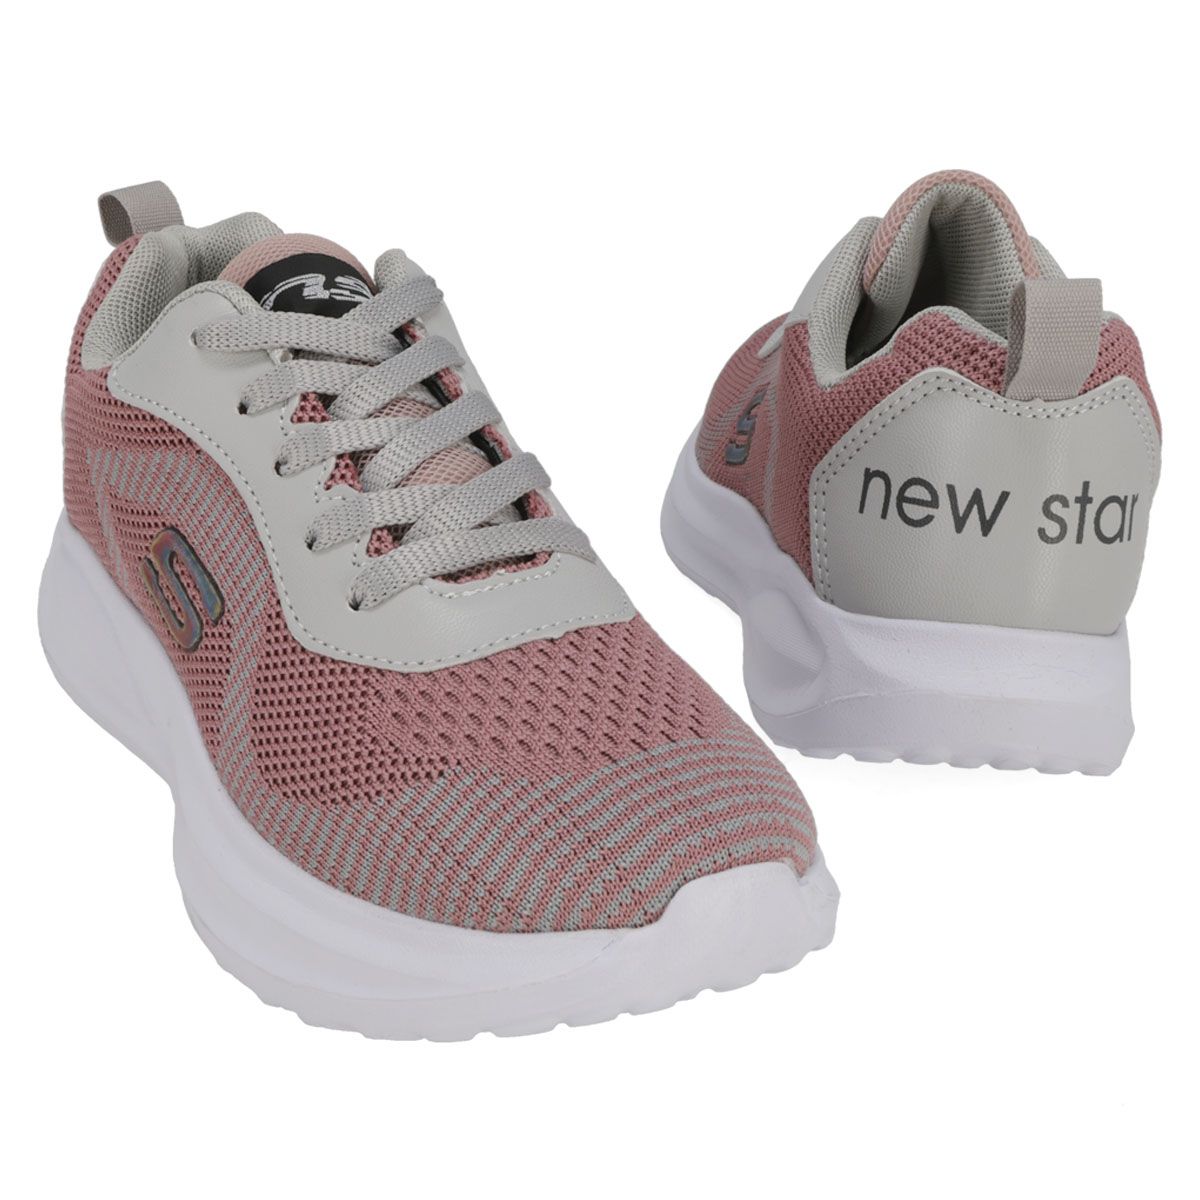 DEPORTIVO MUJER NEW STAR RN-22 GRIS/CORAL